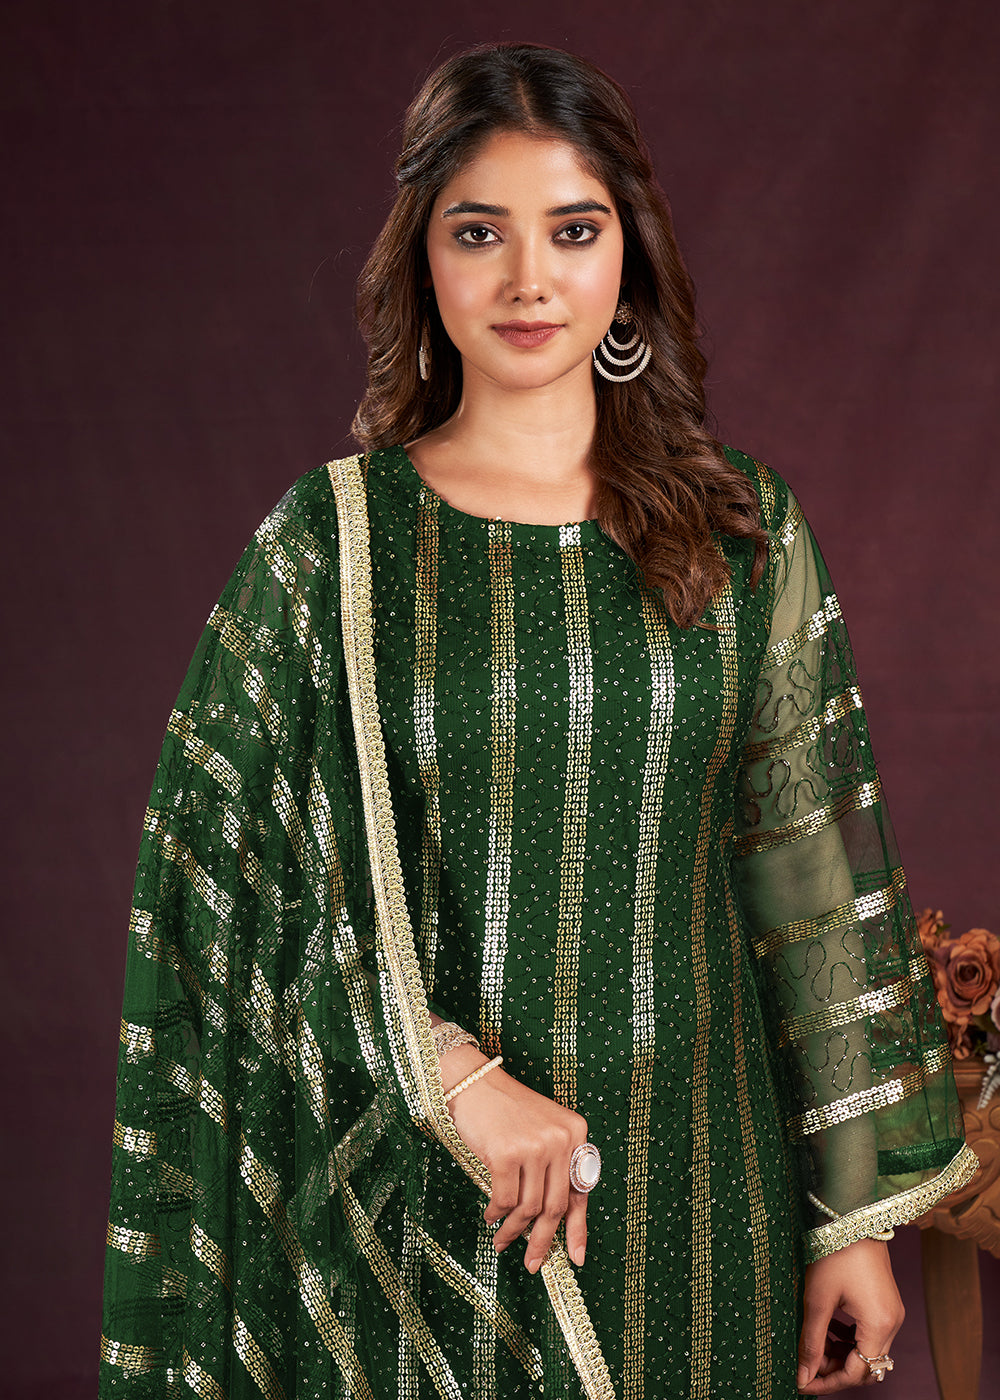 Buy Now Green Butterfly Net Embroidered Festive Salwar Suit Online in USA, UK, Canada, Germany, Australia & Worldwide at Empress Clothing. 